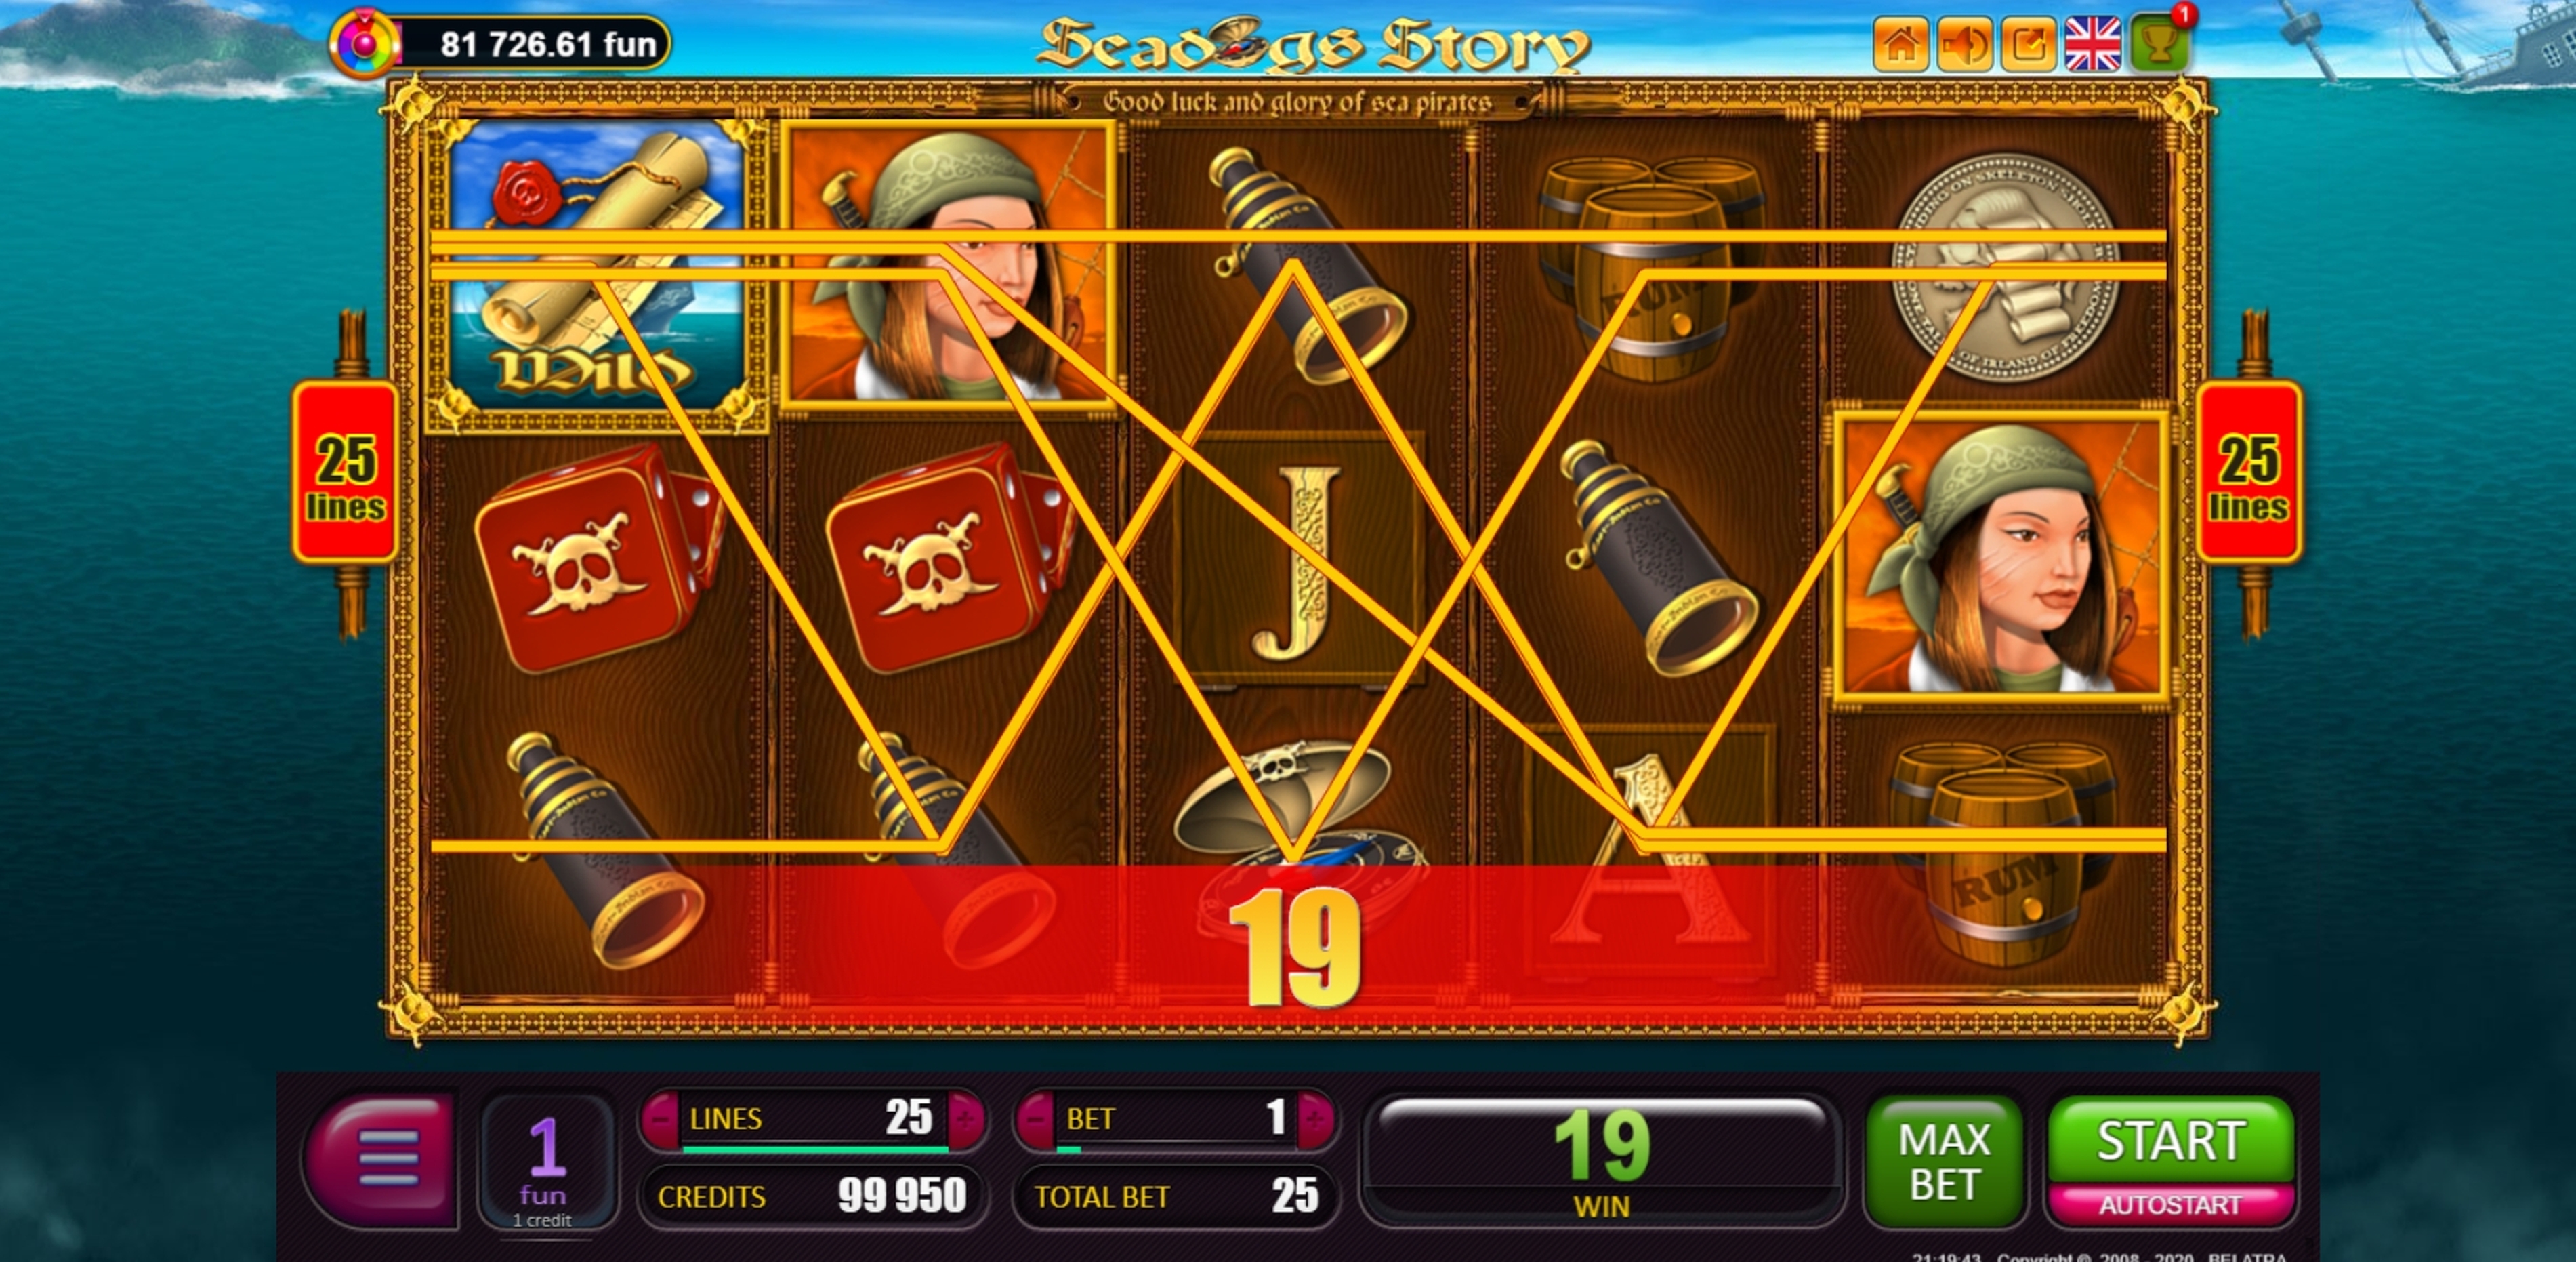 Win Money in Seadogs Story Free Slot Game by Belatra Games